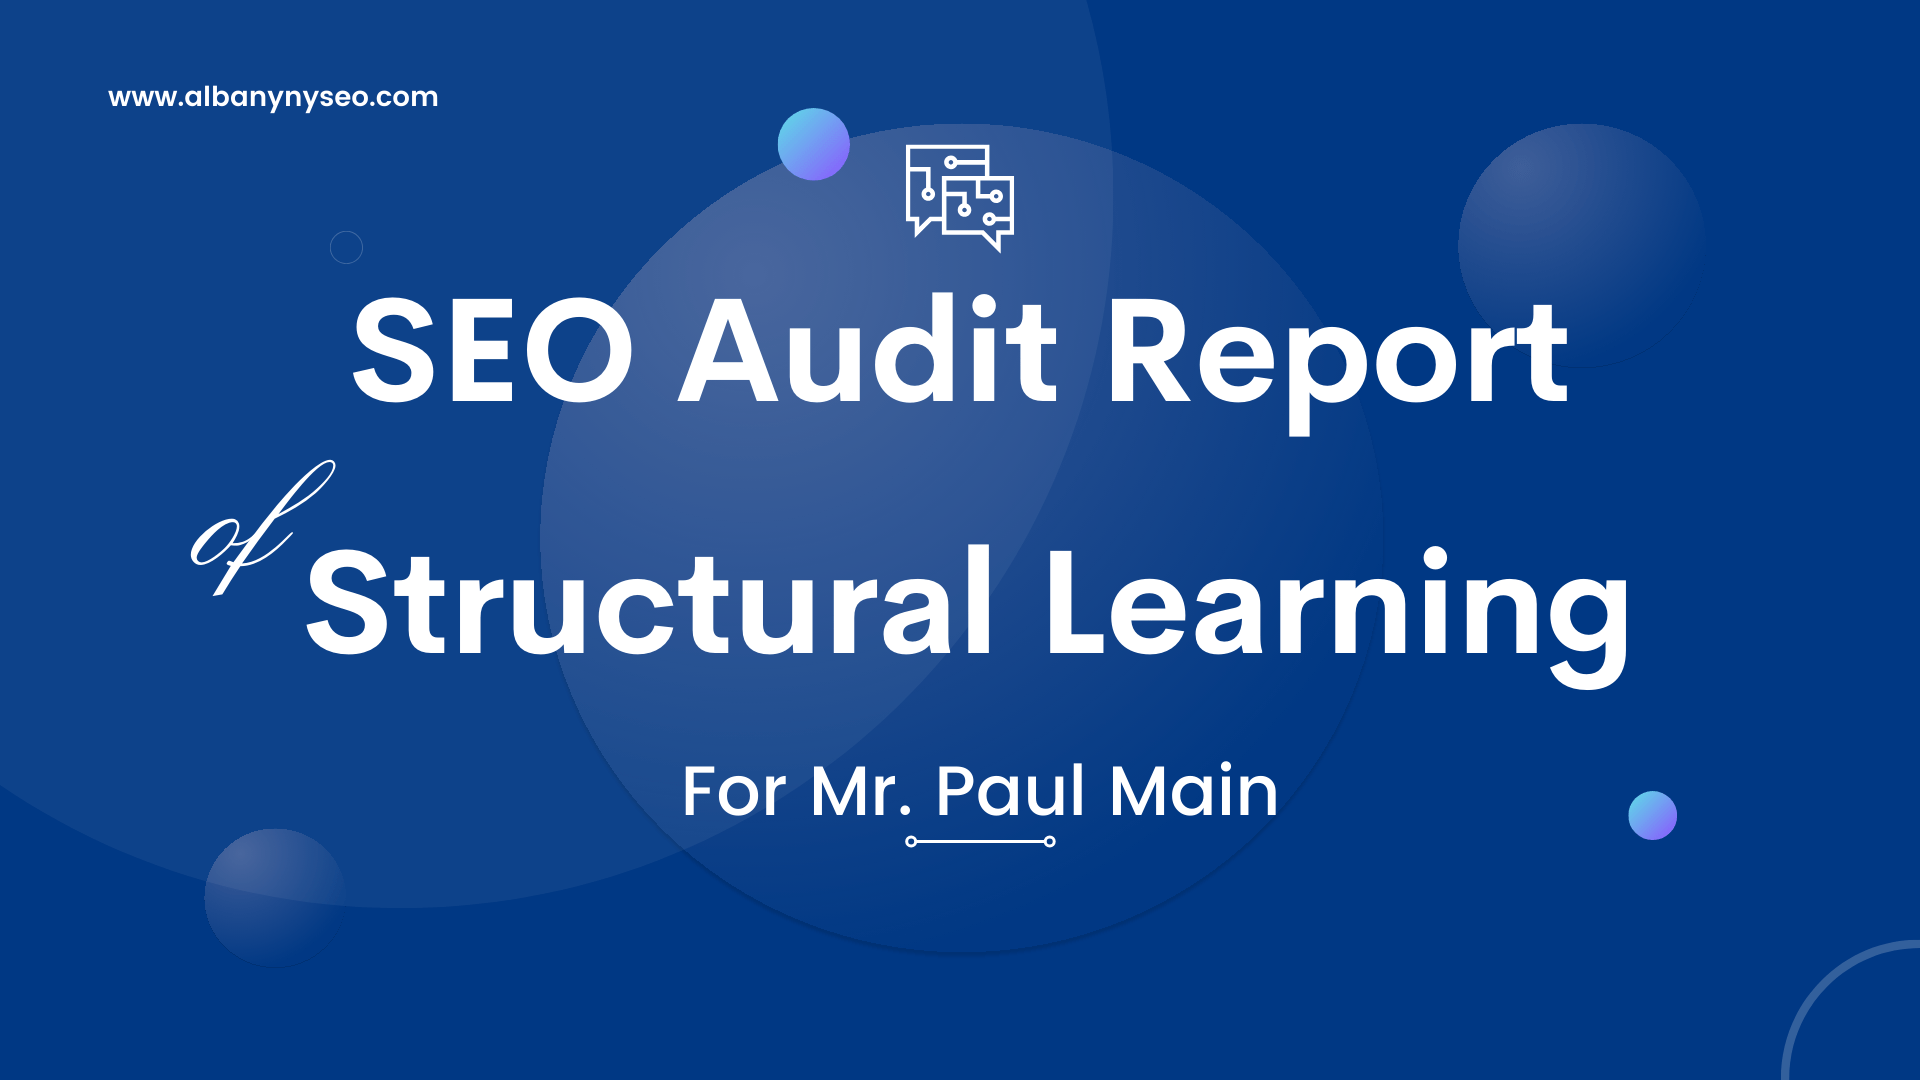 SEO Audit Report of Structural Learning website By albanynyseo